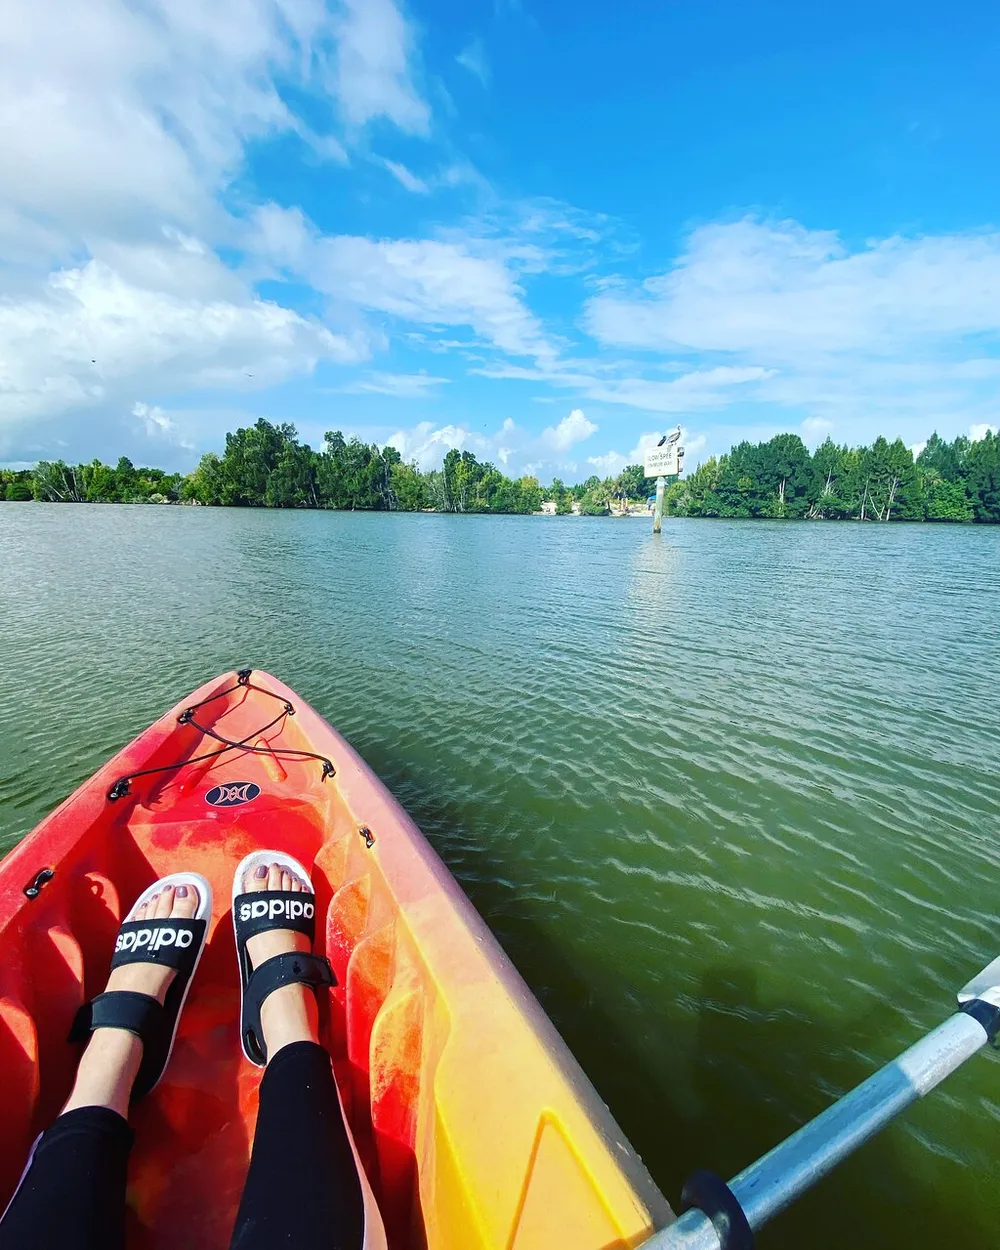 The image captures a first-person view of a person kayaking on a calm river with greenery on the banks and a mix of clouds and blue sky overhead